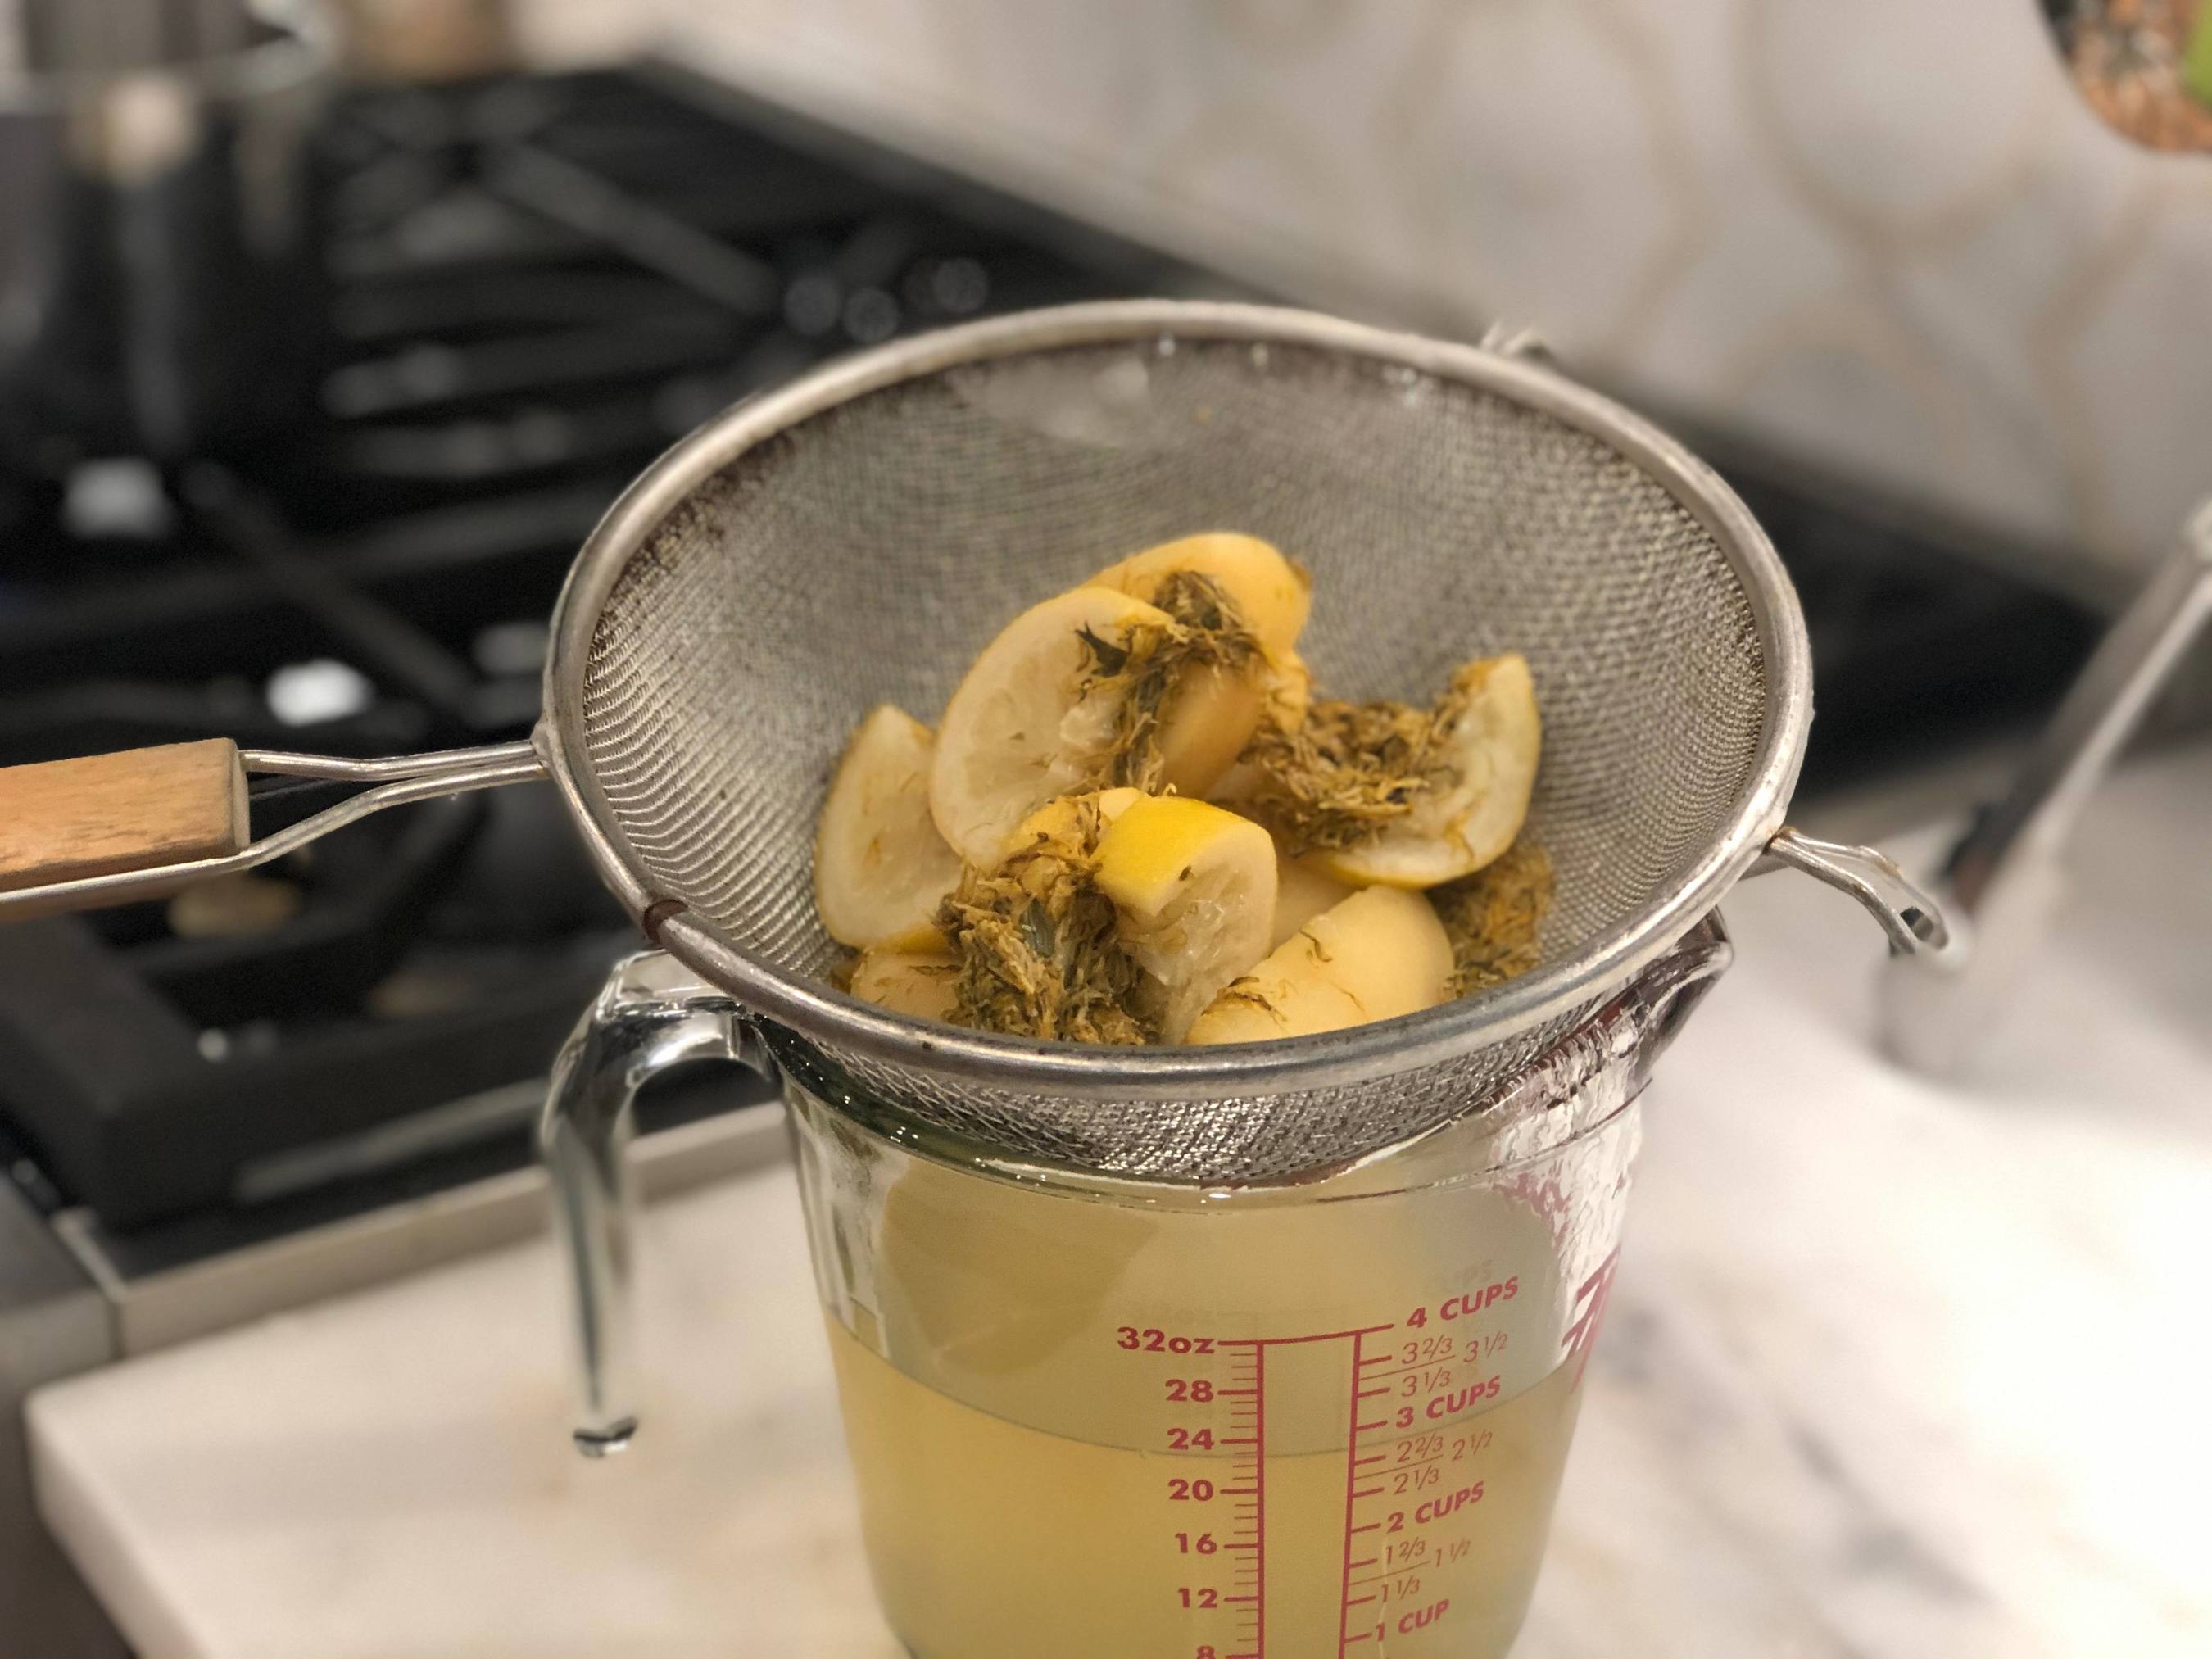 lemon and cooked dandelions strained into a measuring cup